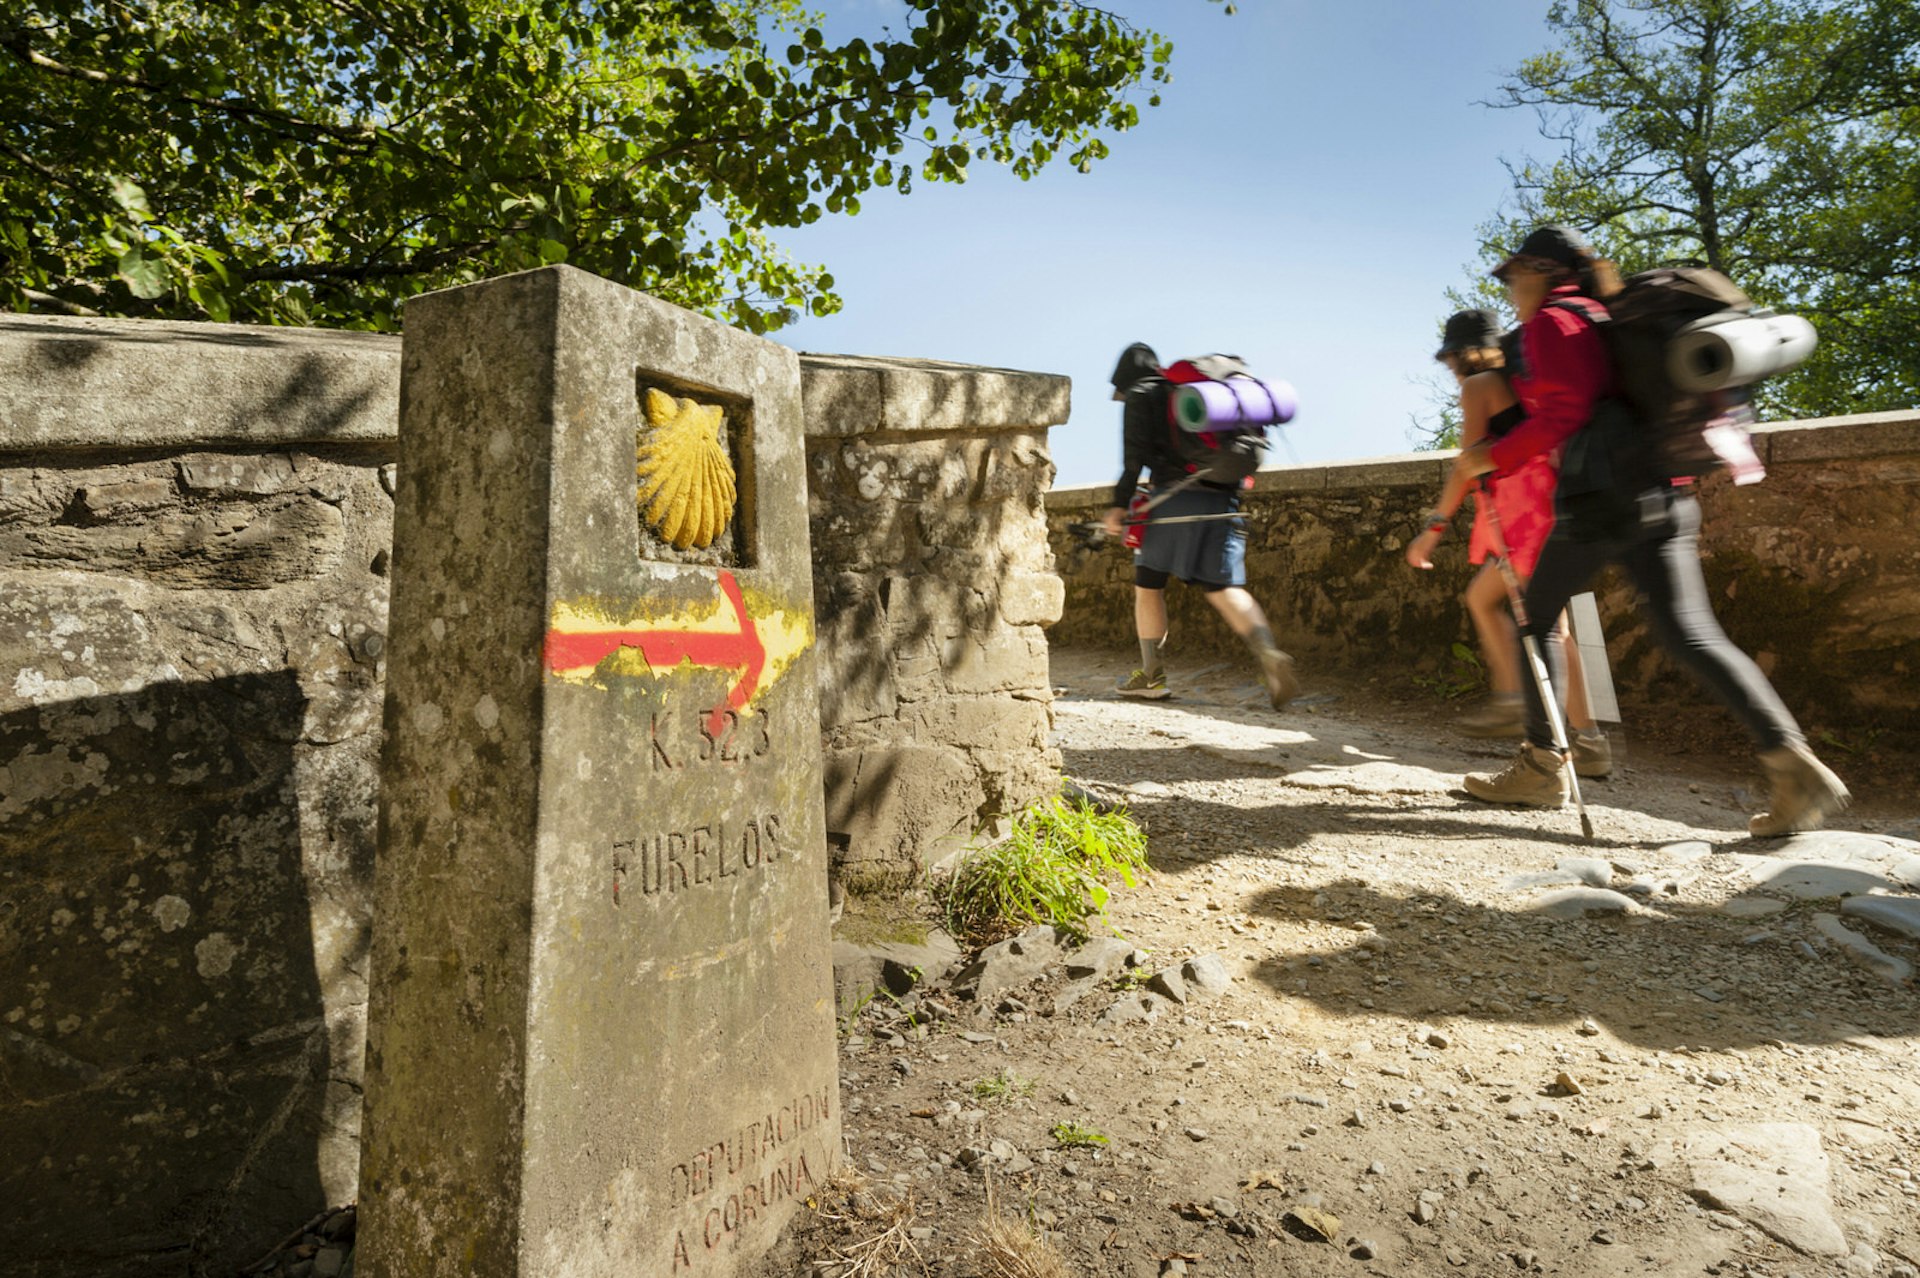 The scallop shell is the symbol of the Camino de Santiago, seen on waymarkers along the route